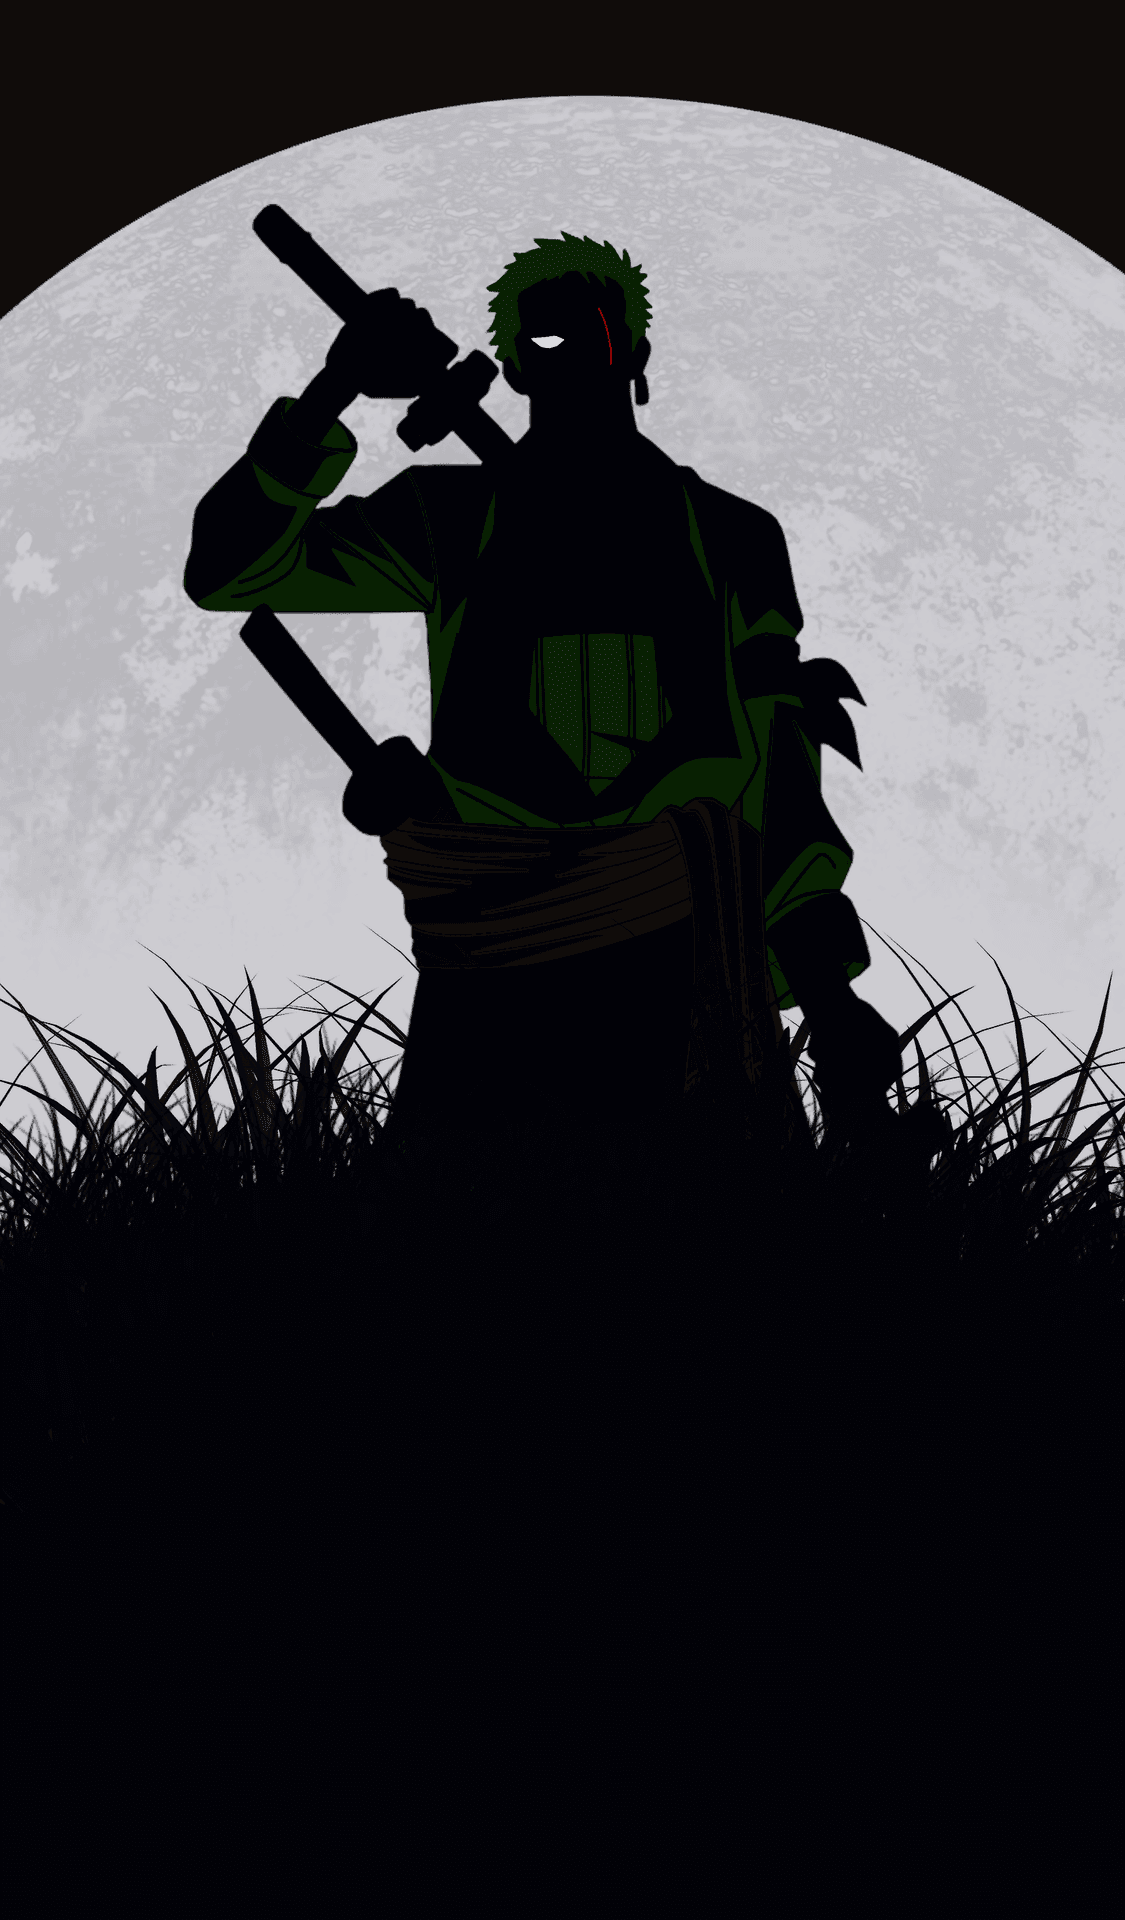 A bold illustration of Zoro, the famous swordsman from the One Piece series.